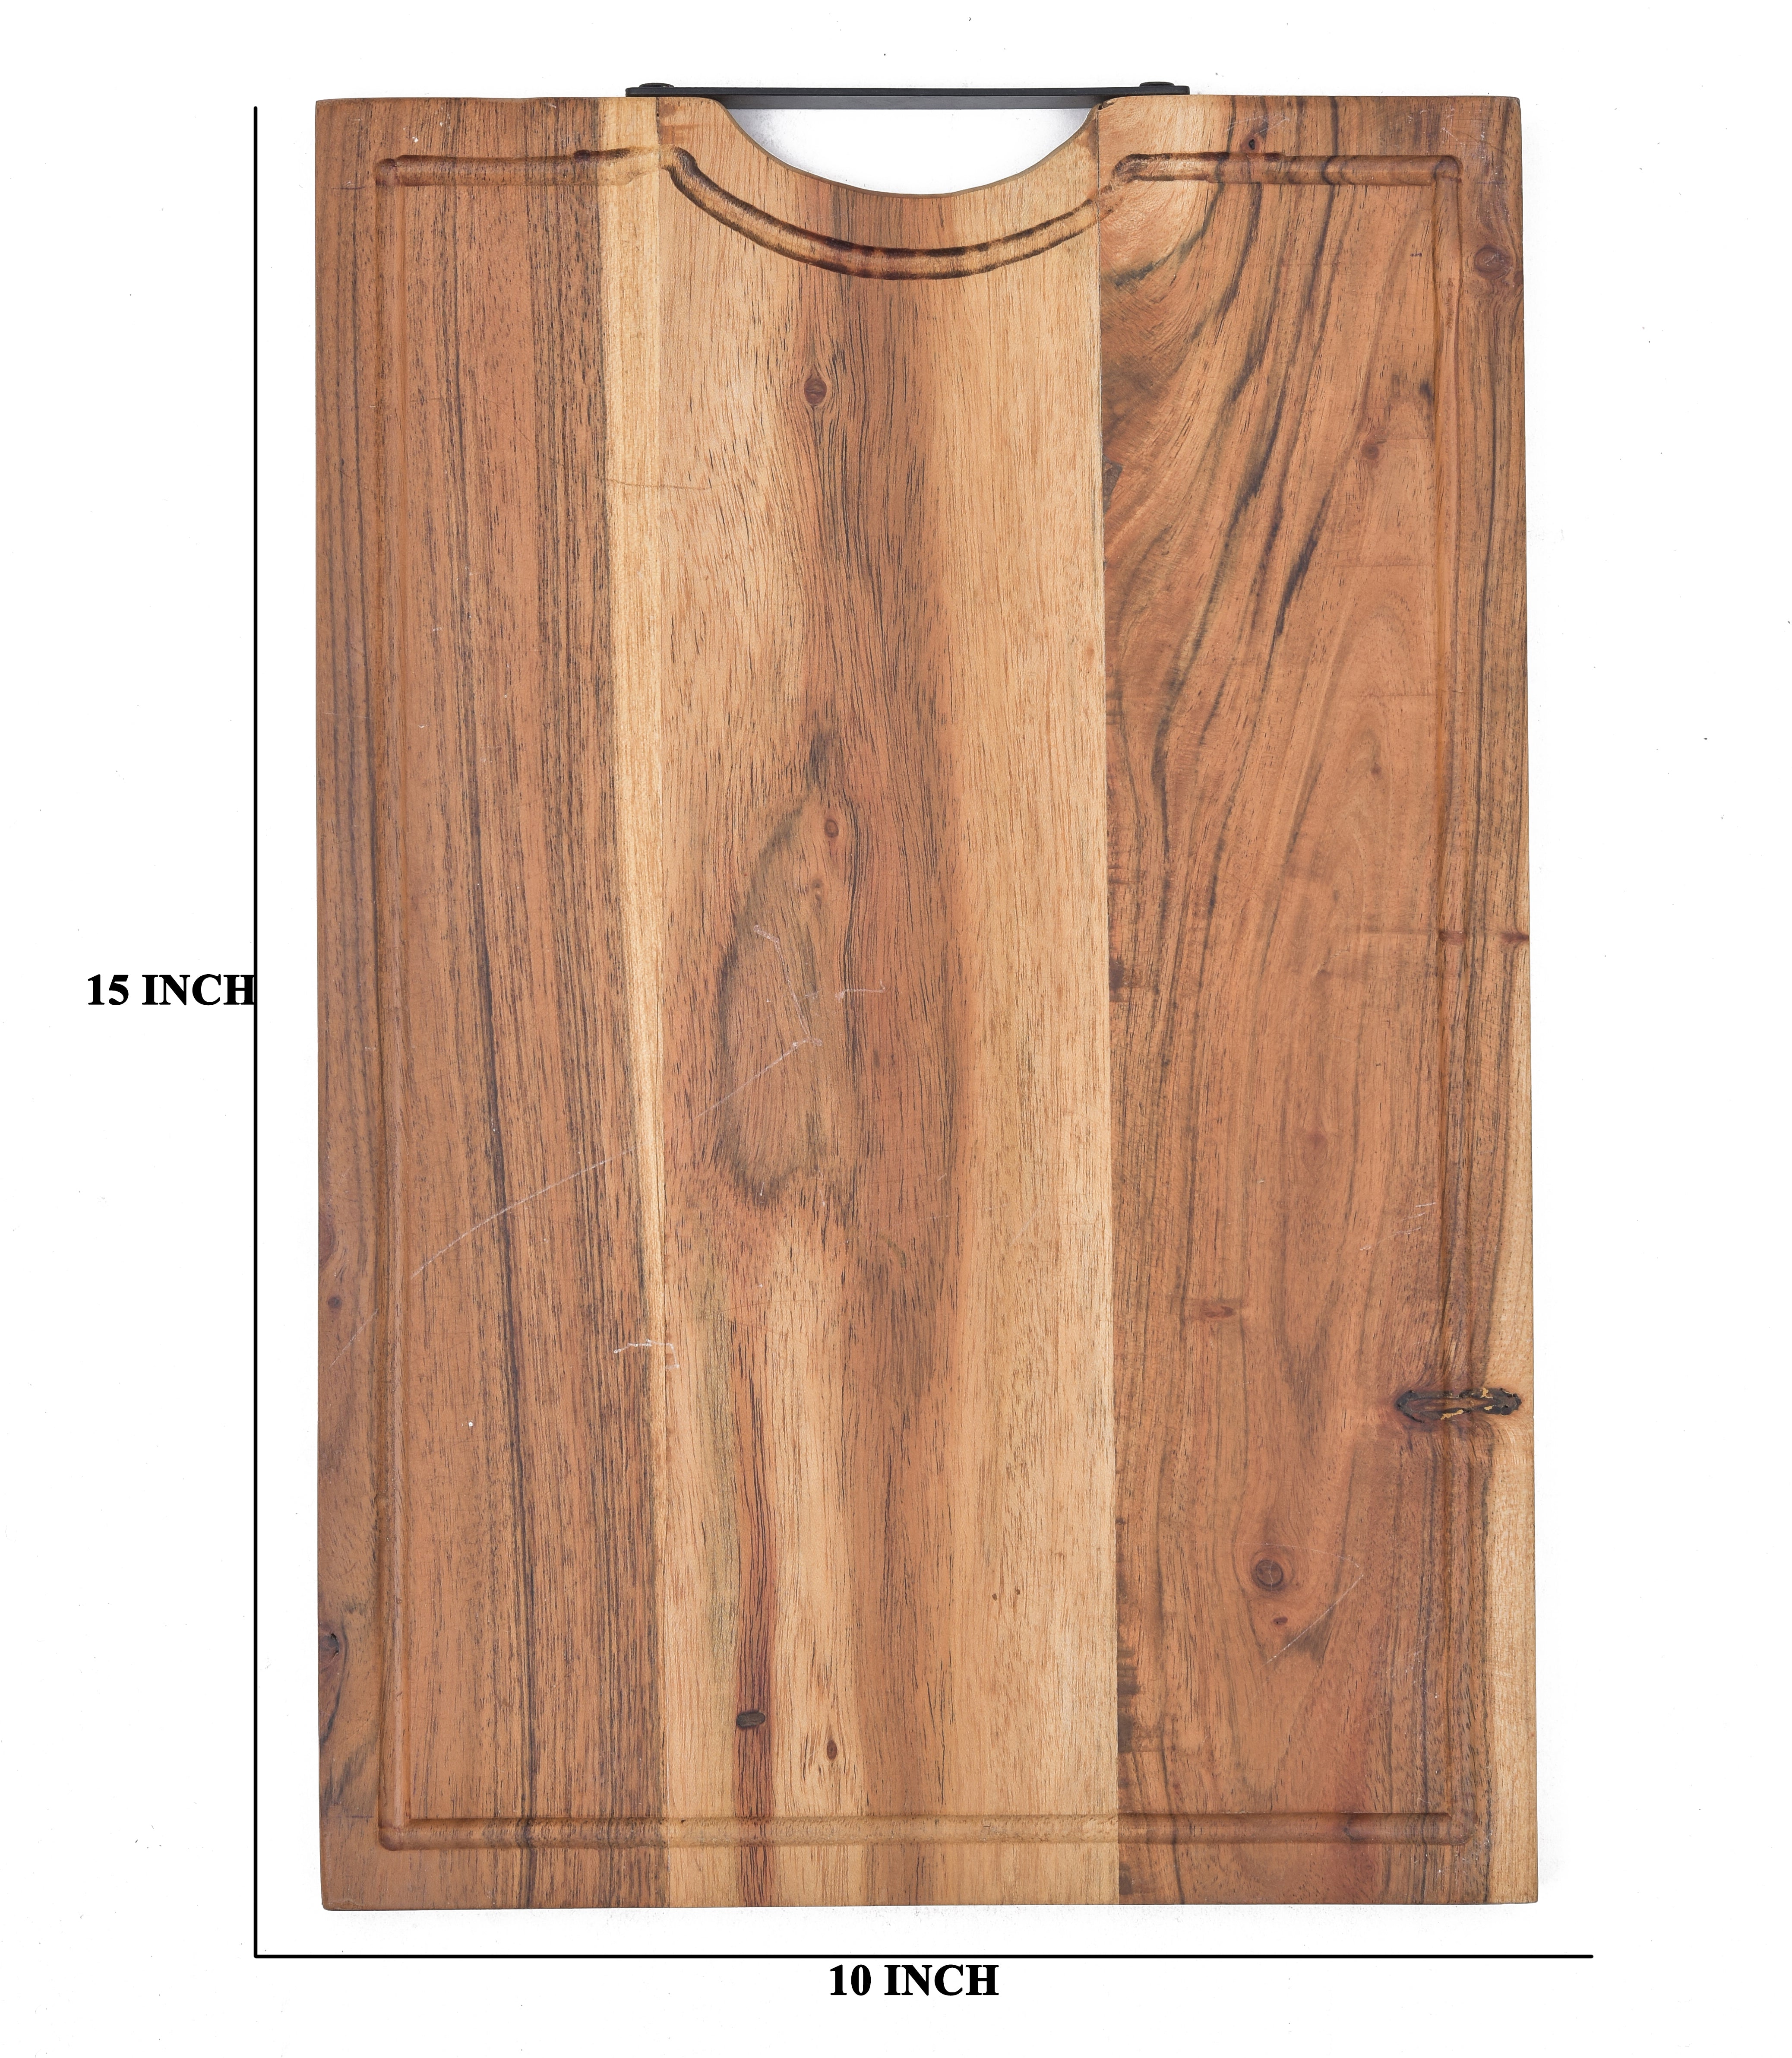 ACACIA WOOD INNER DESIGN WITH IRON HANDLE SHAPE CHOPPING BOARD